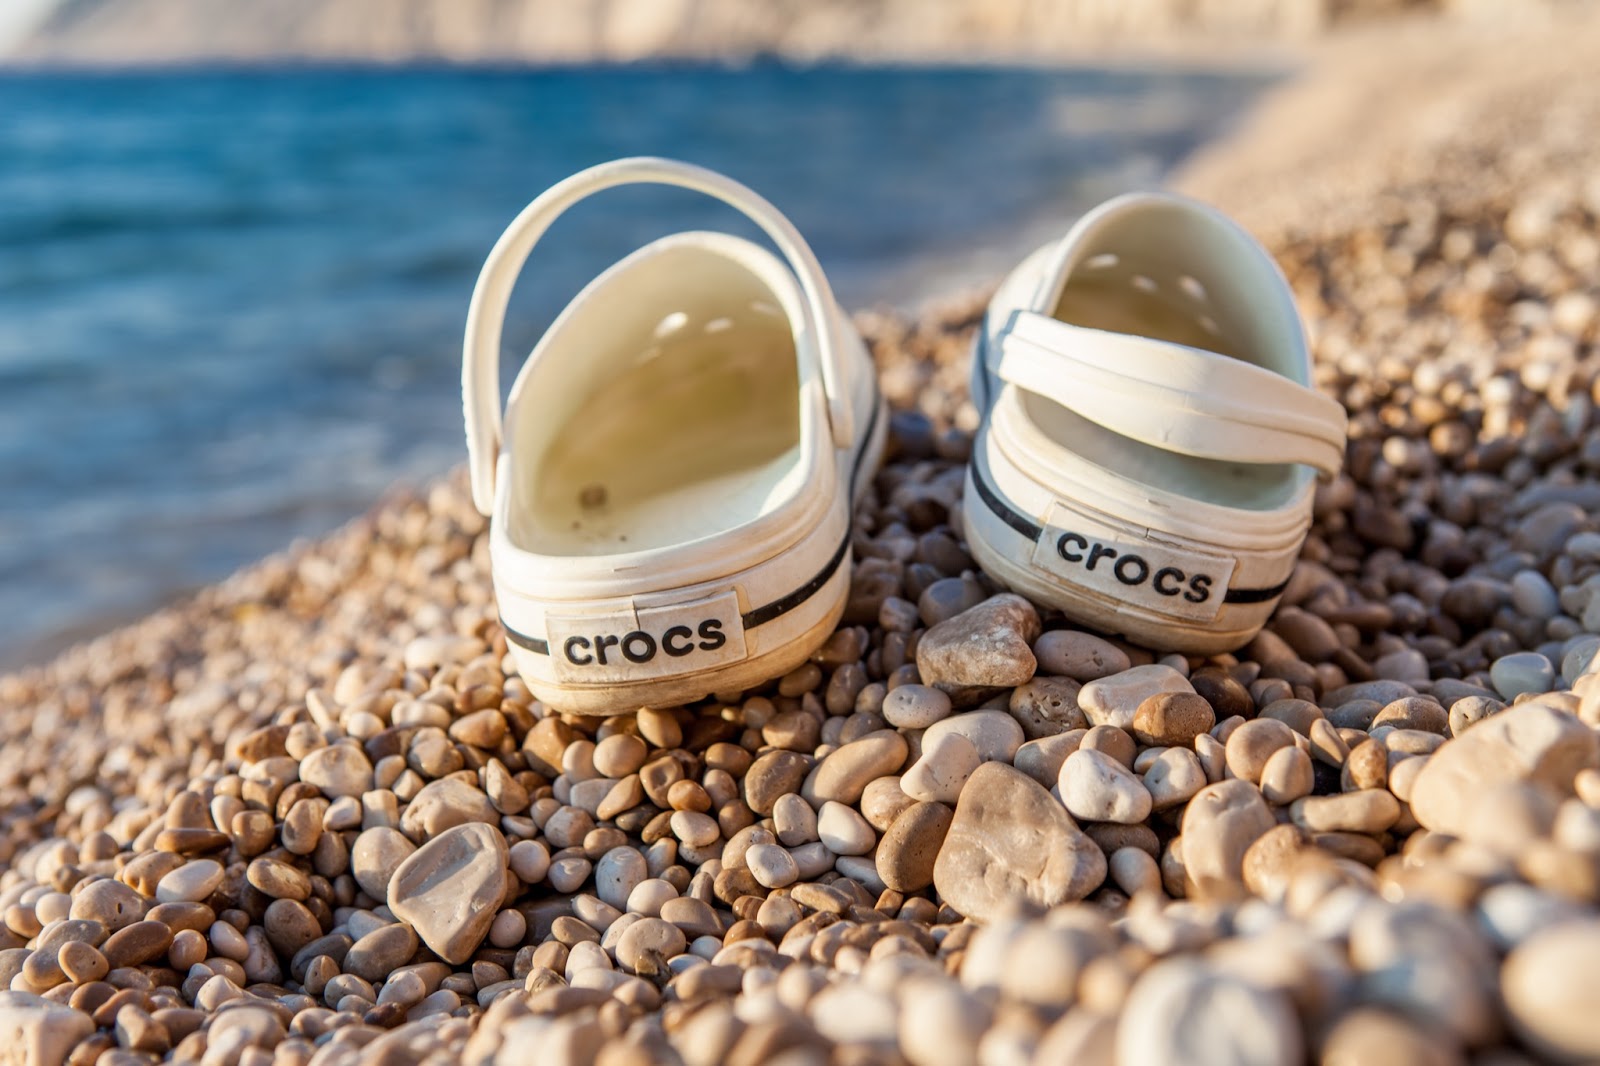 The Most Popular Examples of Partnerships and Collections for Crocs